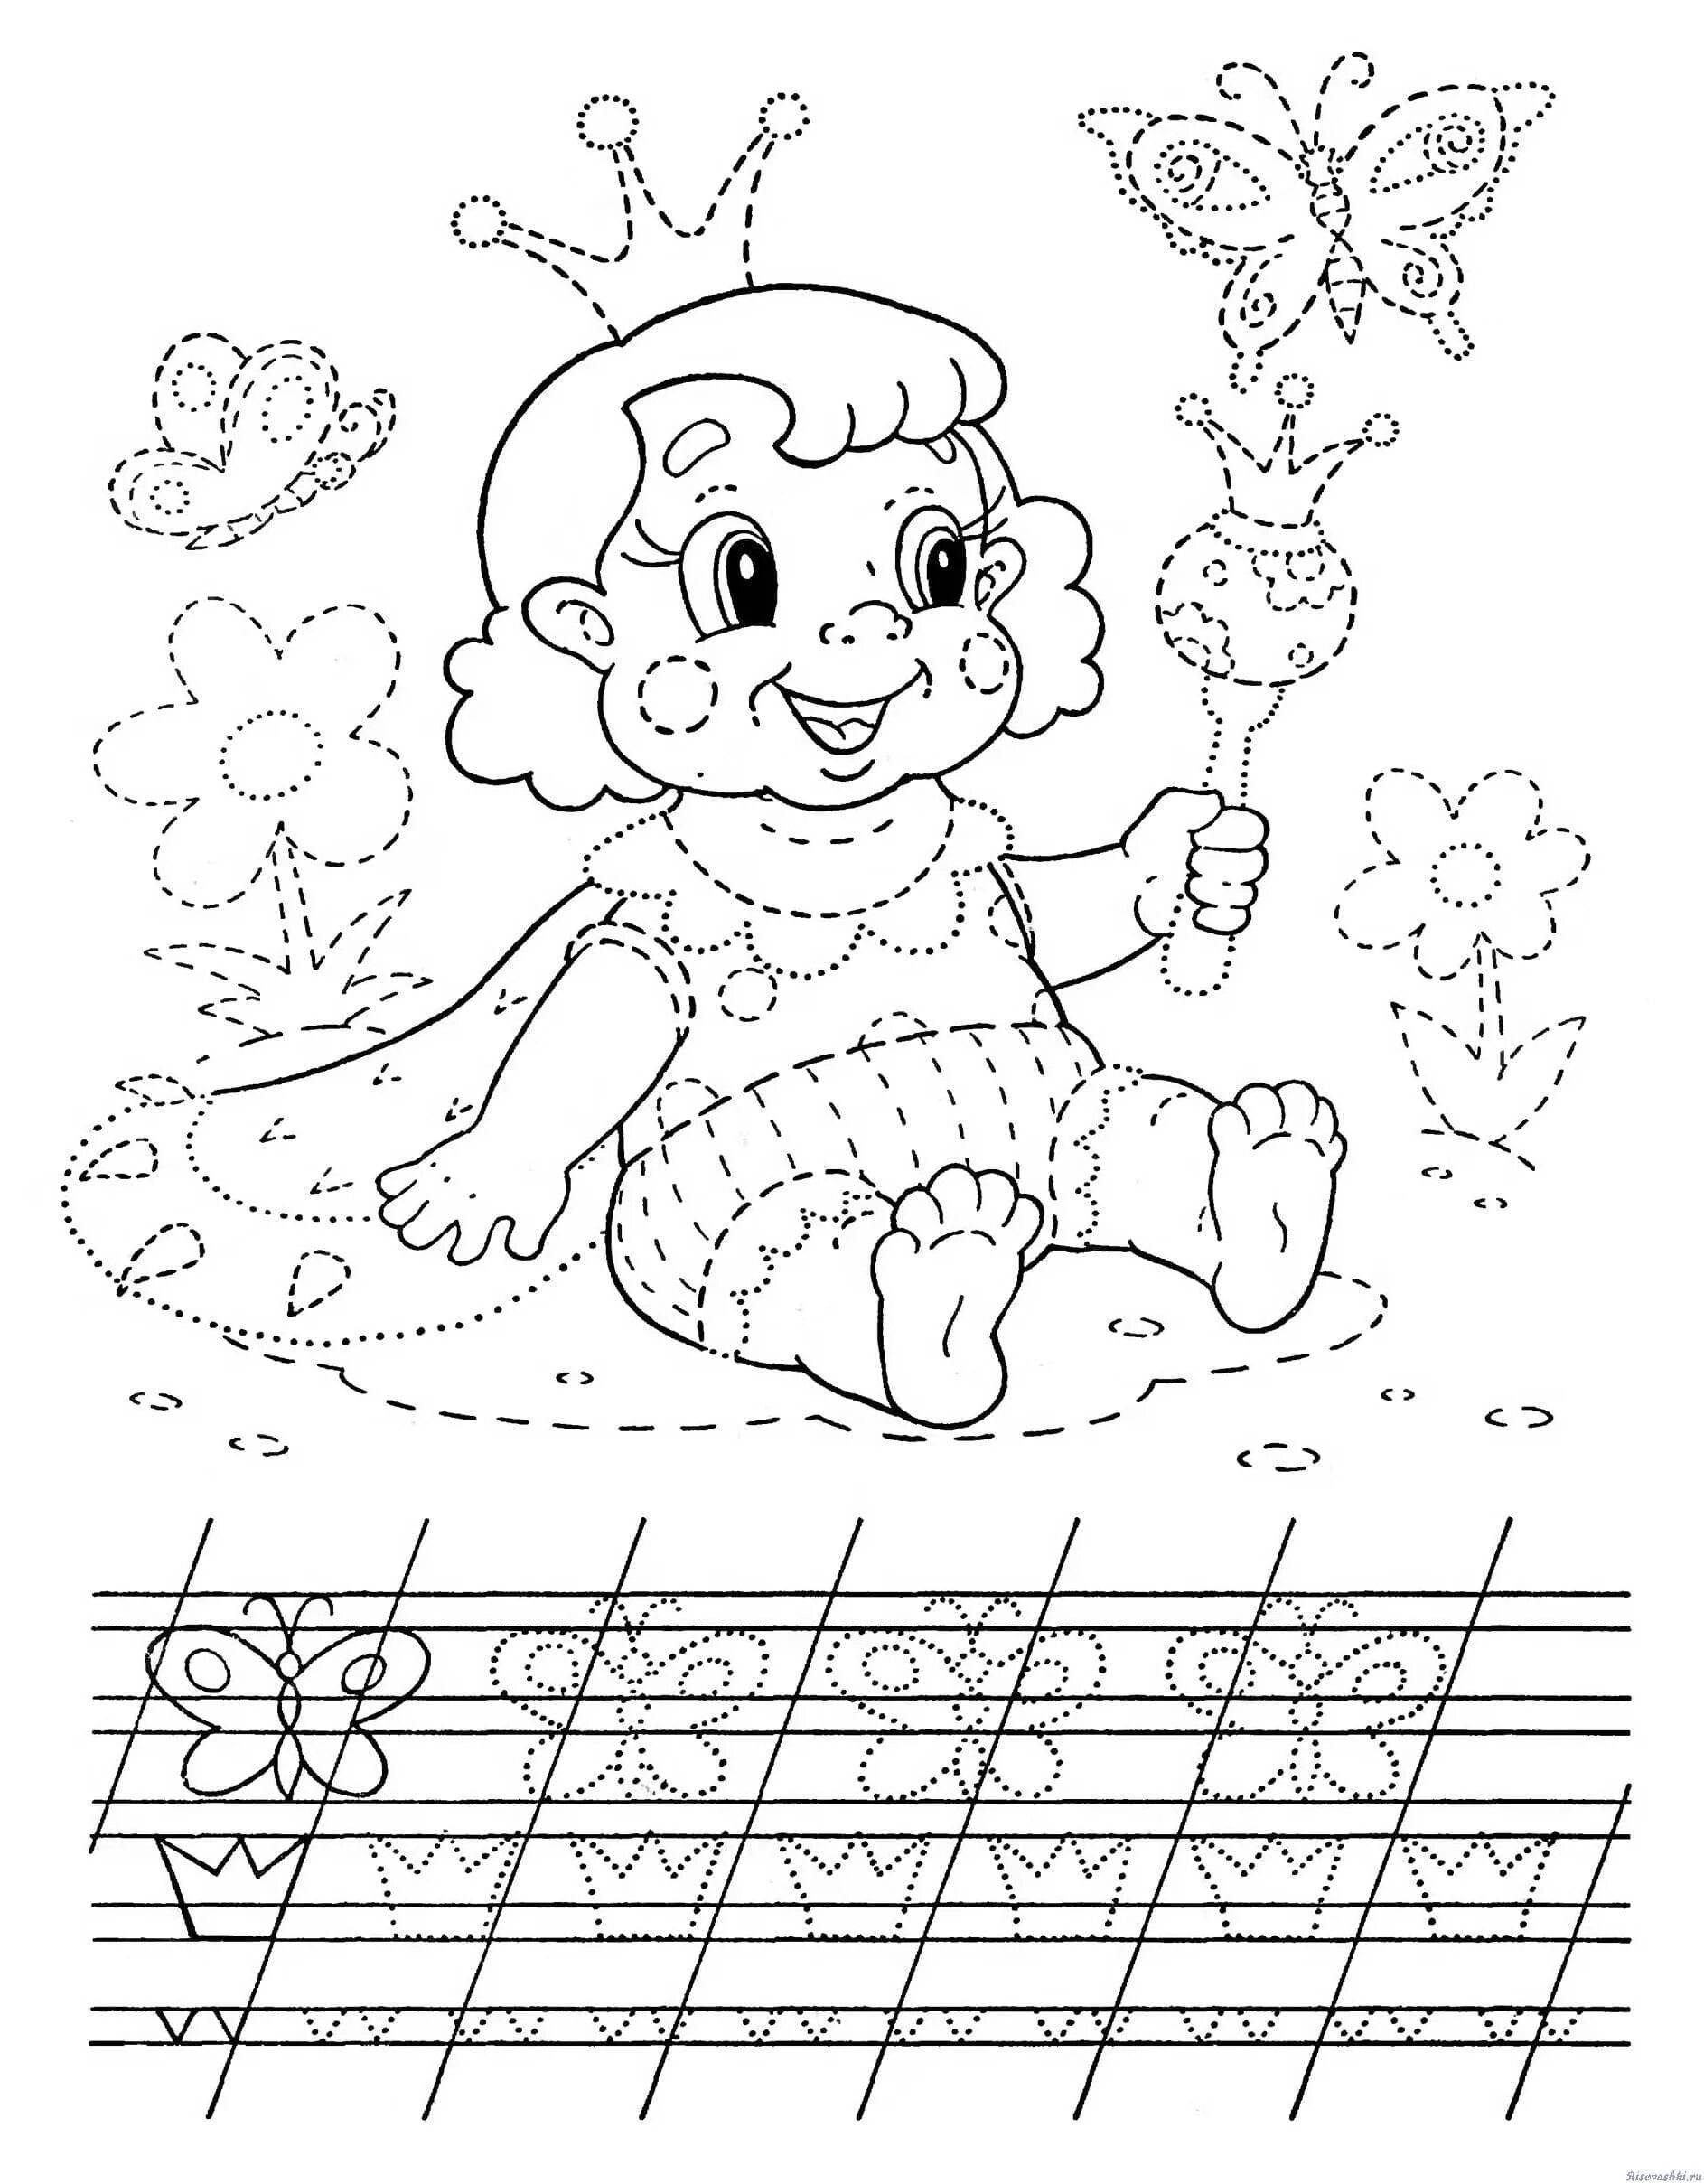 Delightful coloring recipe for children 4-5 years old